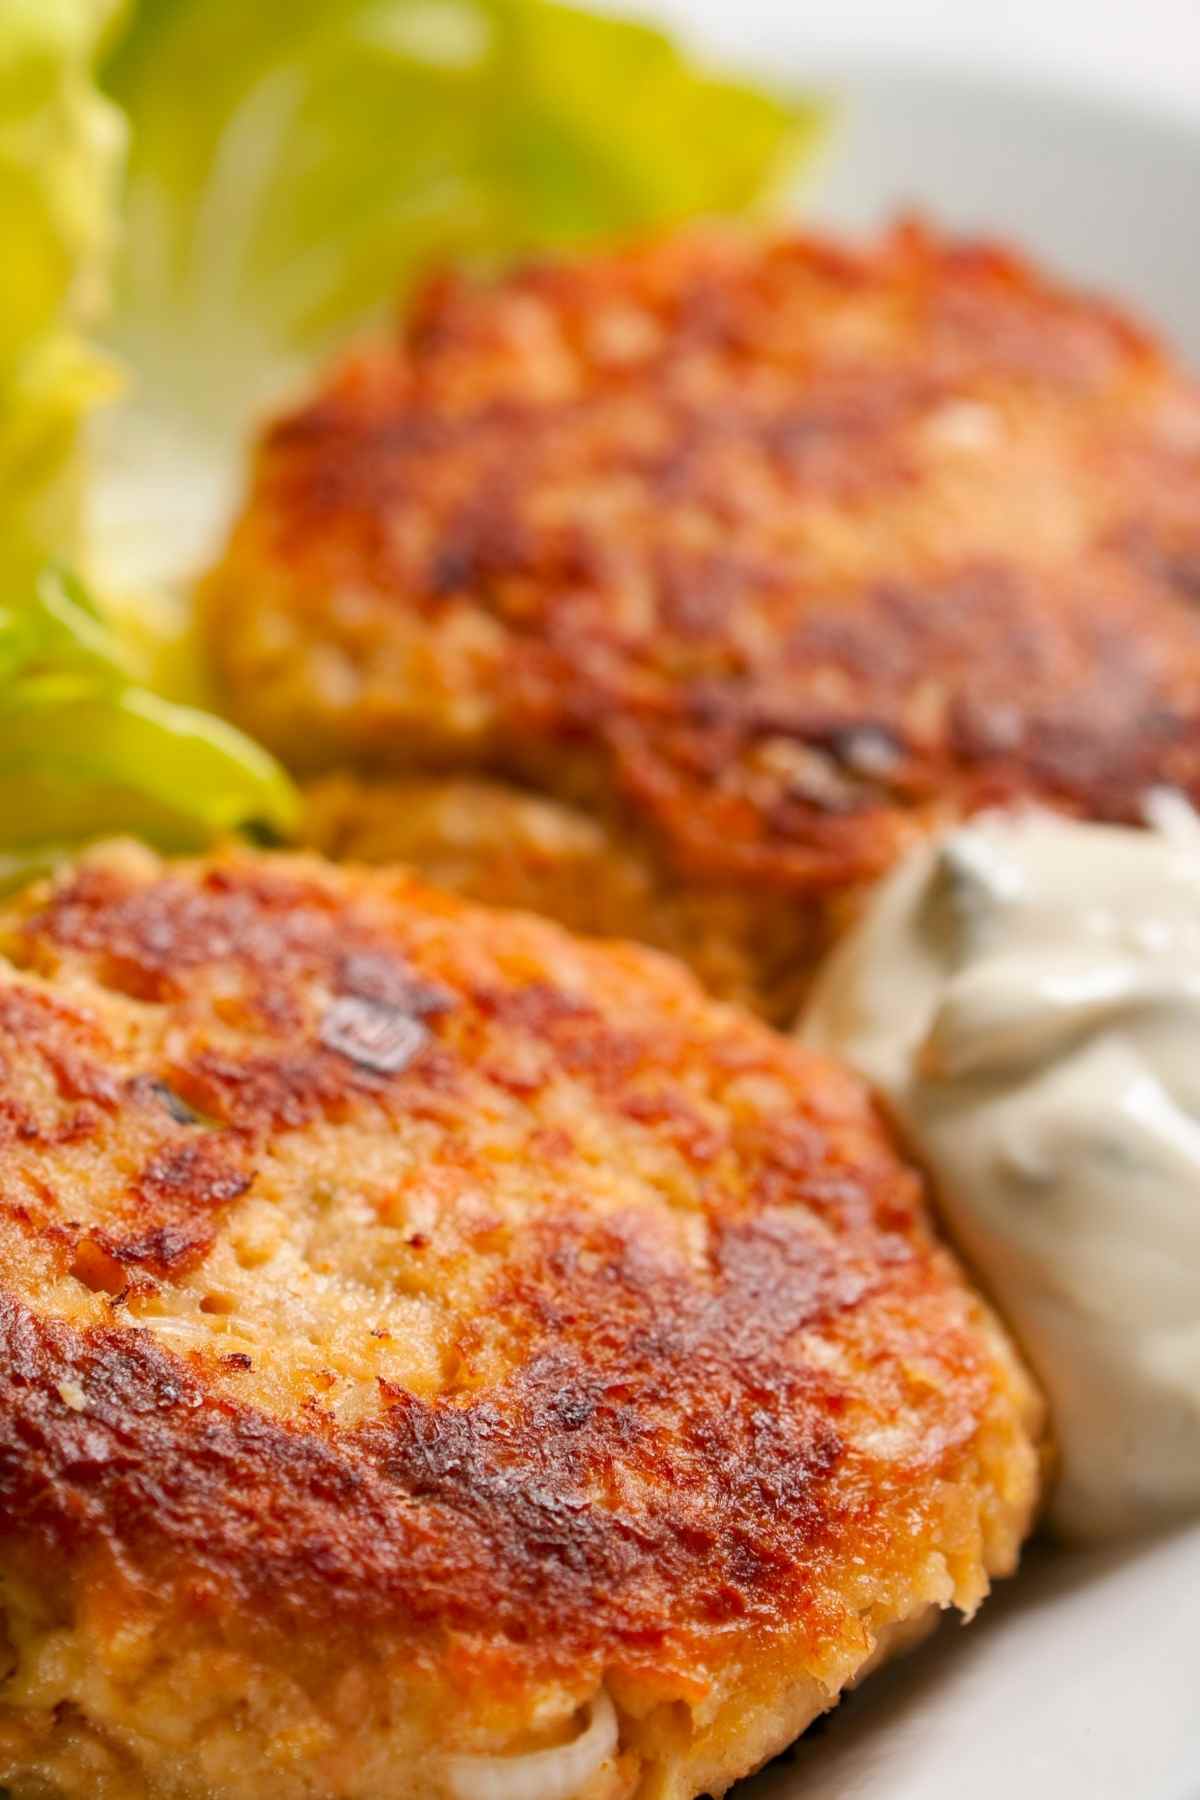 You’ll love the savory flavor of these Old Fashioned Salmon Patties. They’re cooked on the stovetop until crisp and delicious.